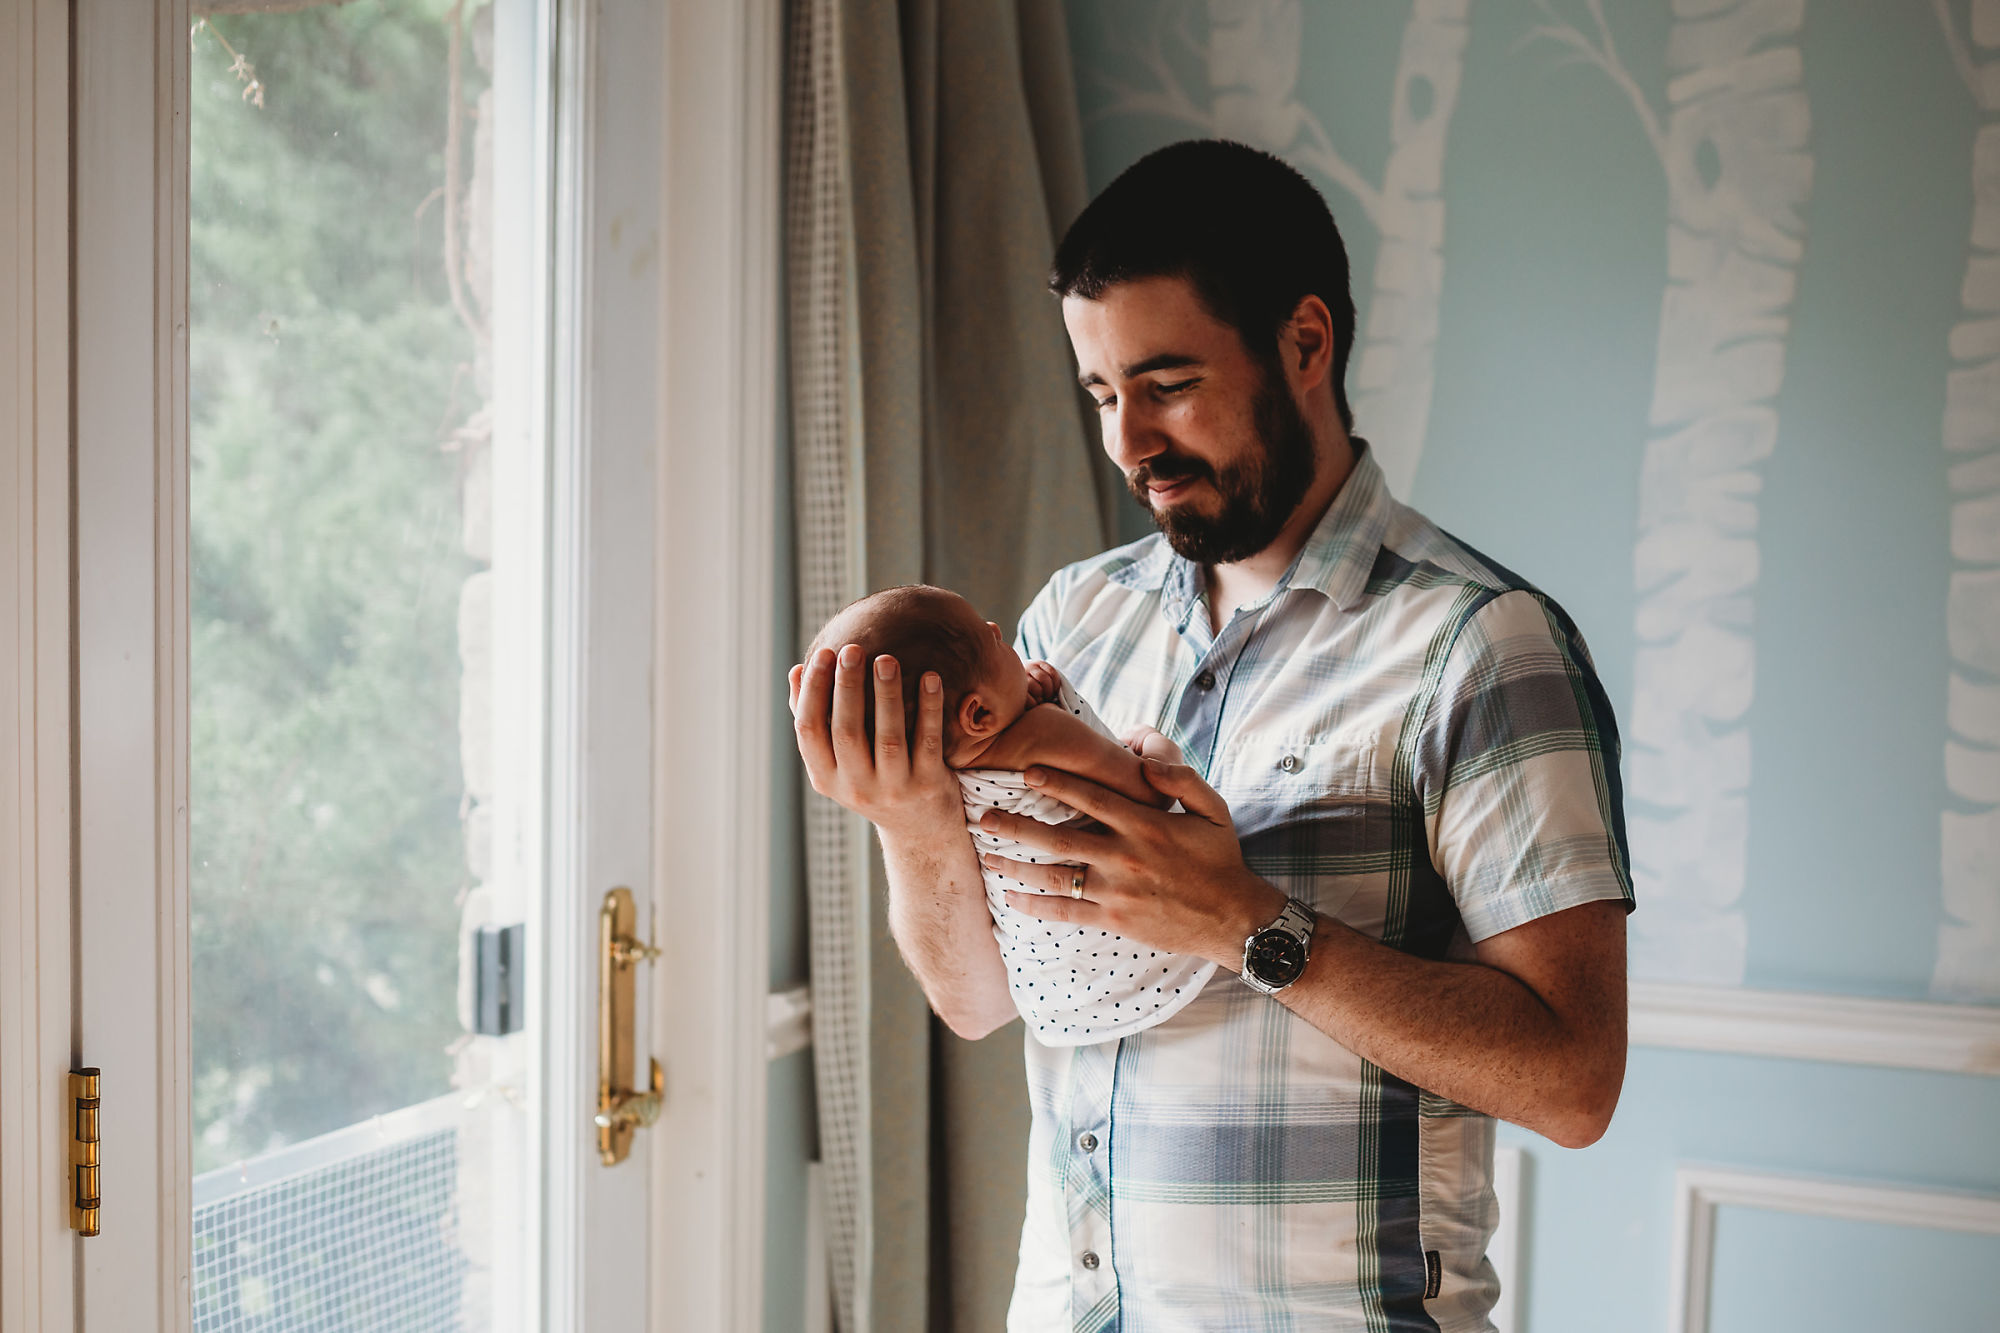 Dundas Newborn Photographer Jennifer Blaak captures the essence of fatherly love during their newborn and family lifestyle photography session at home in Hamilton.